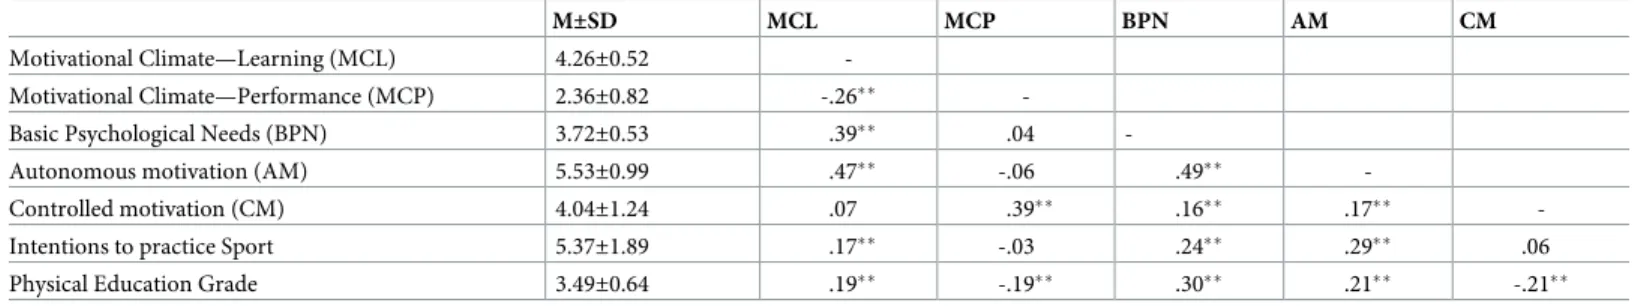 Table 2. Mean, standard deviations, and bivariate correlations between the study variables.